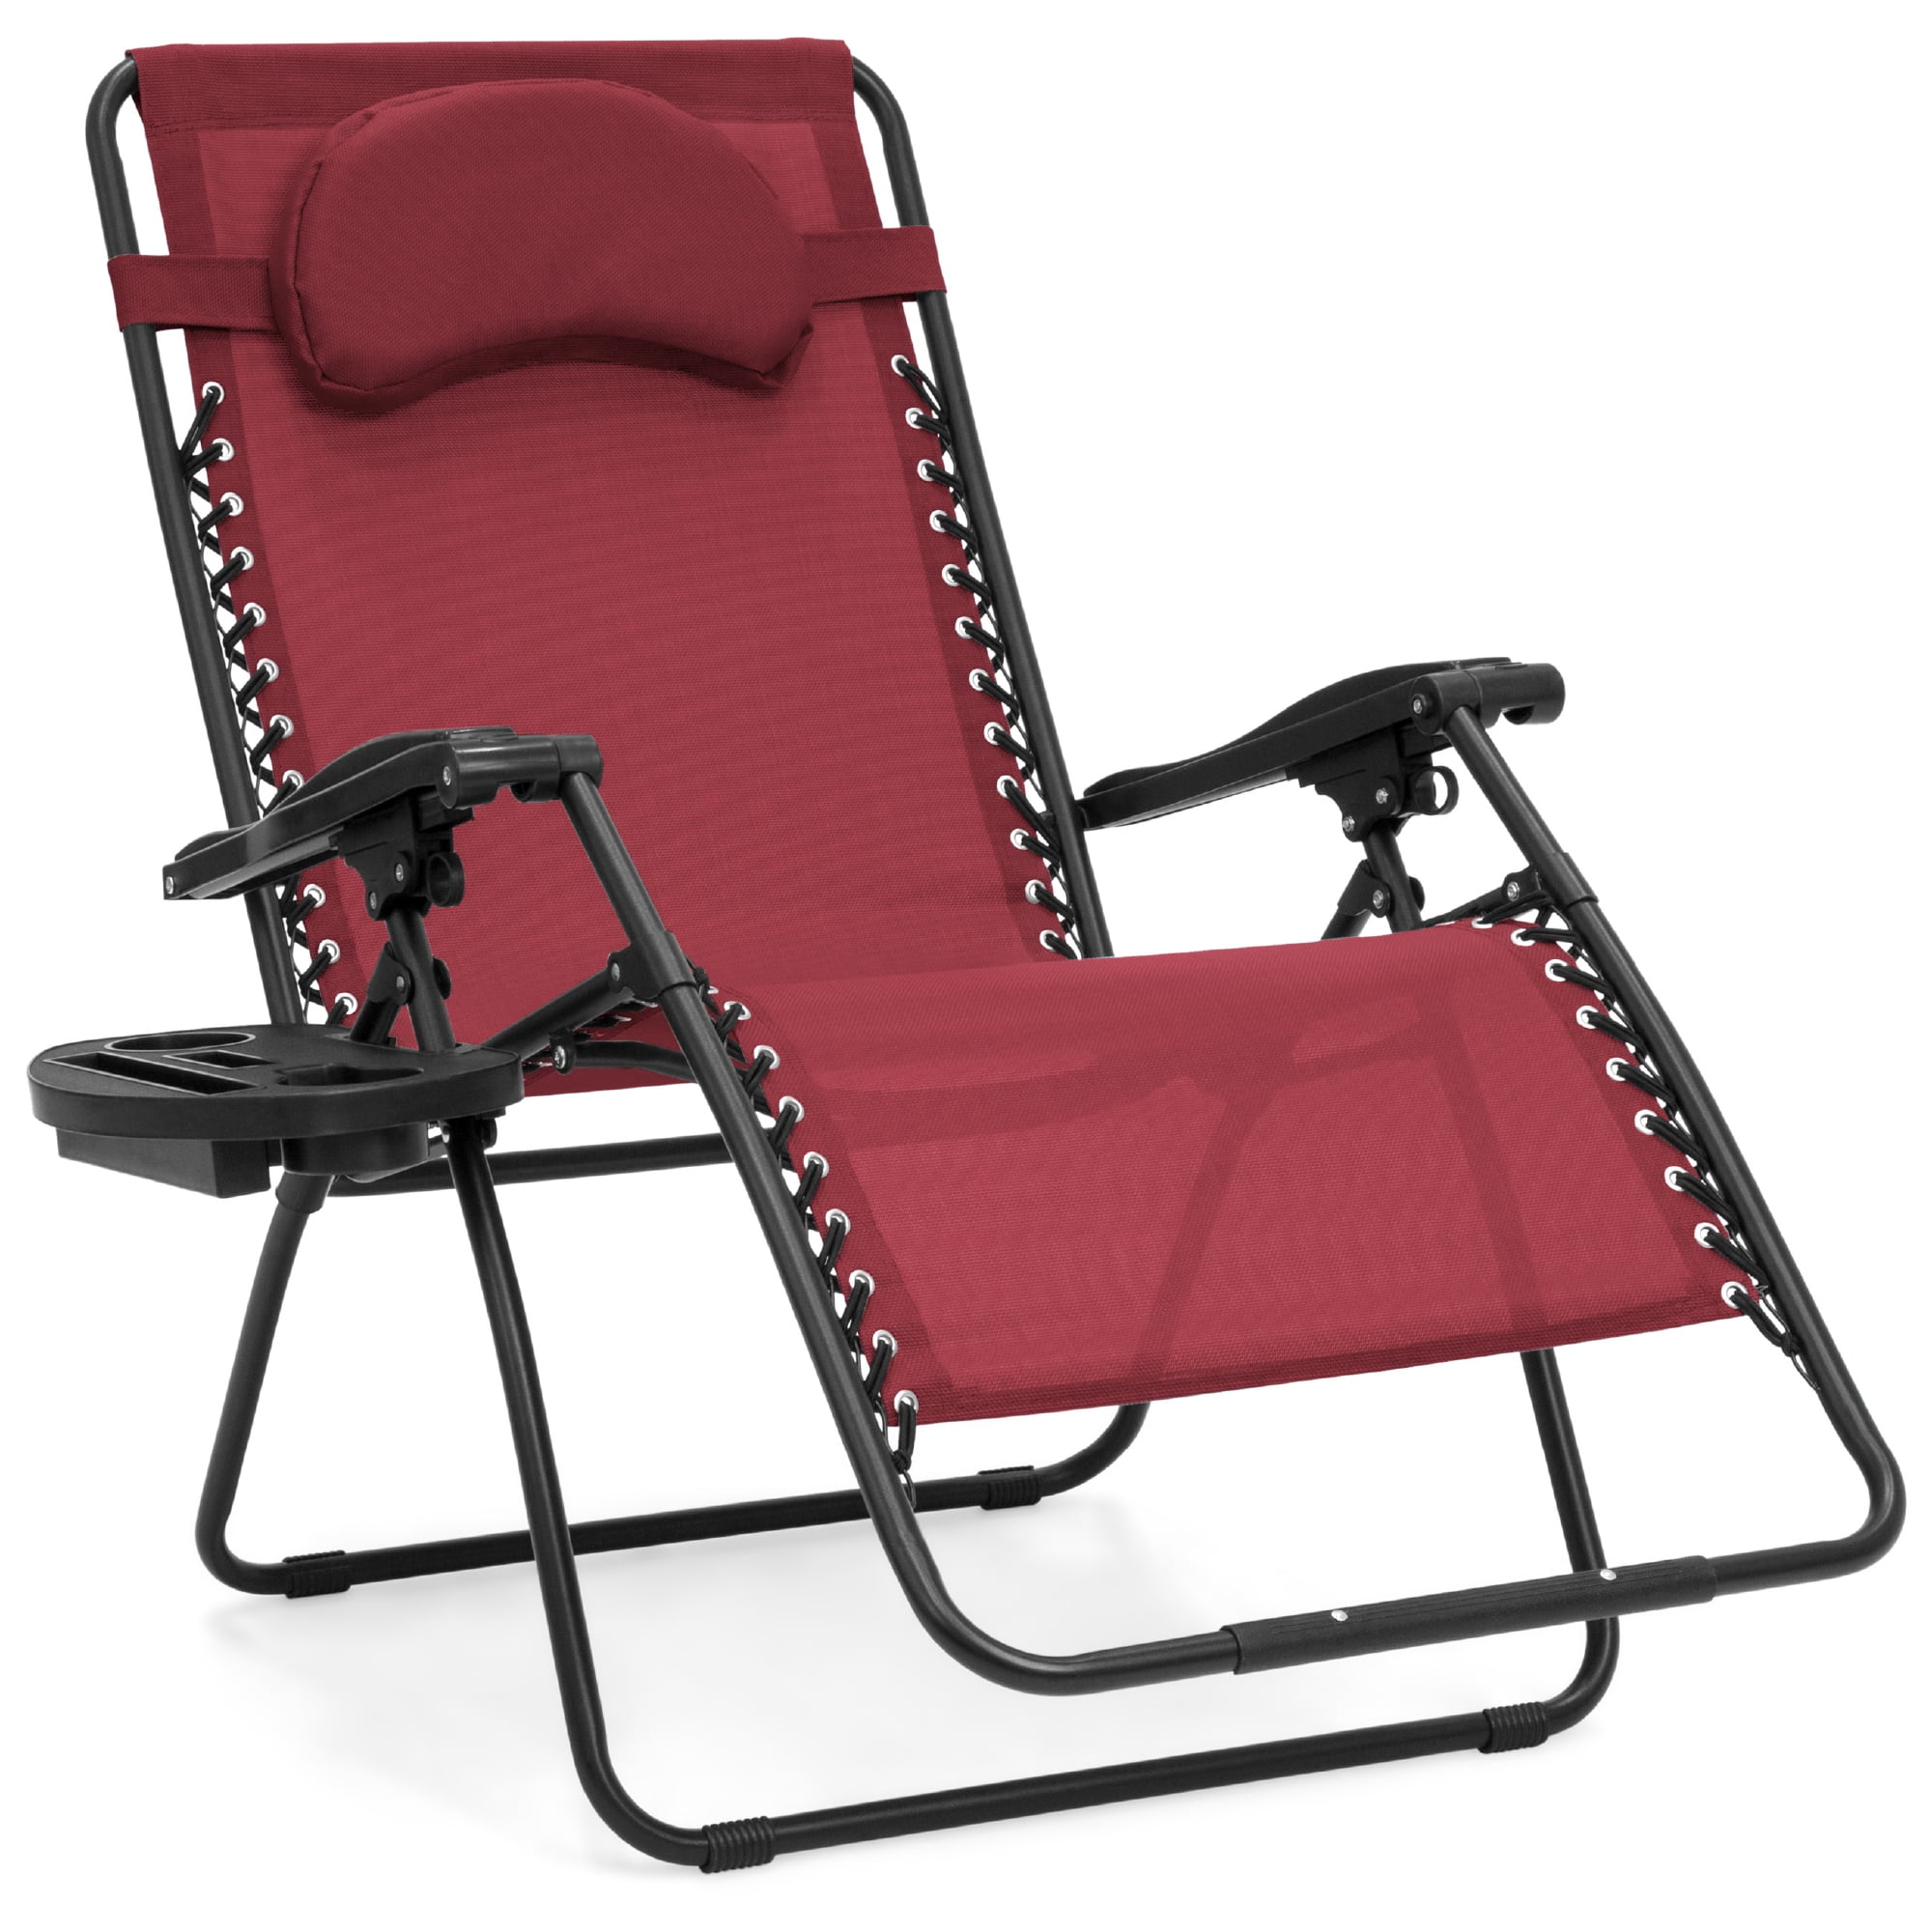 XL Rocking Chair Folable Zero Gravity Lounge Chair With Detachable Cup Holder 